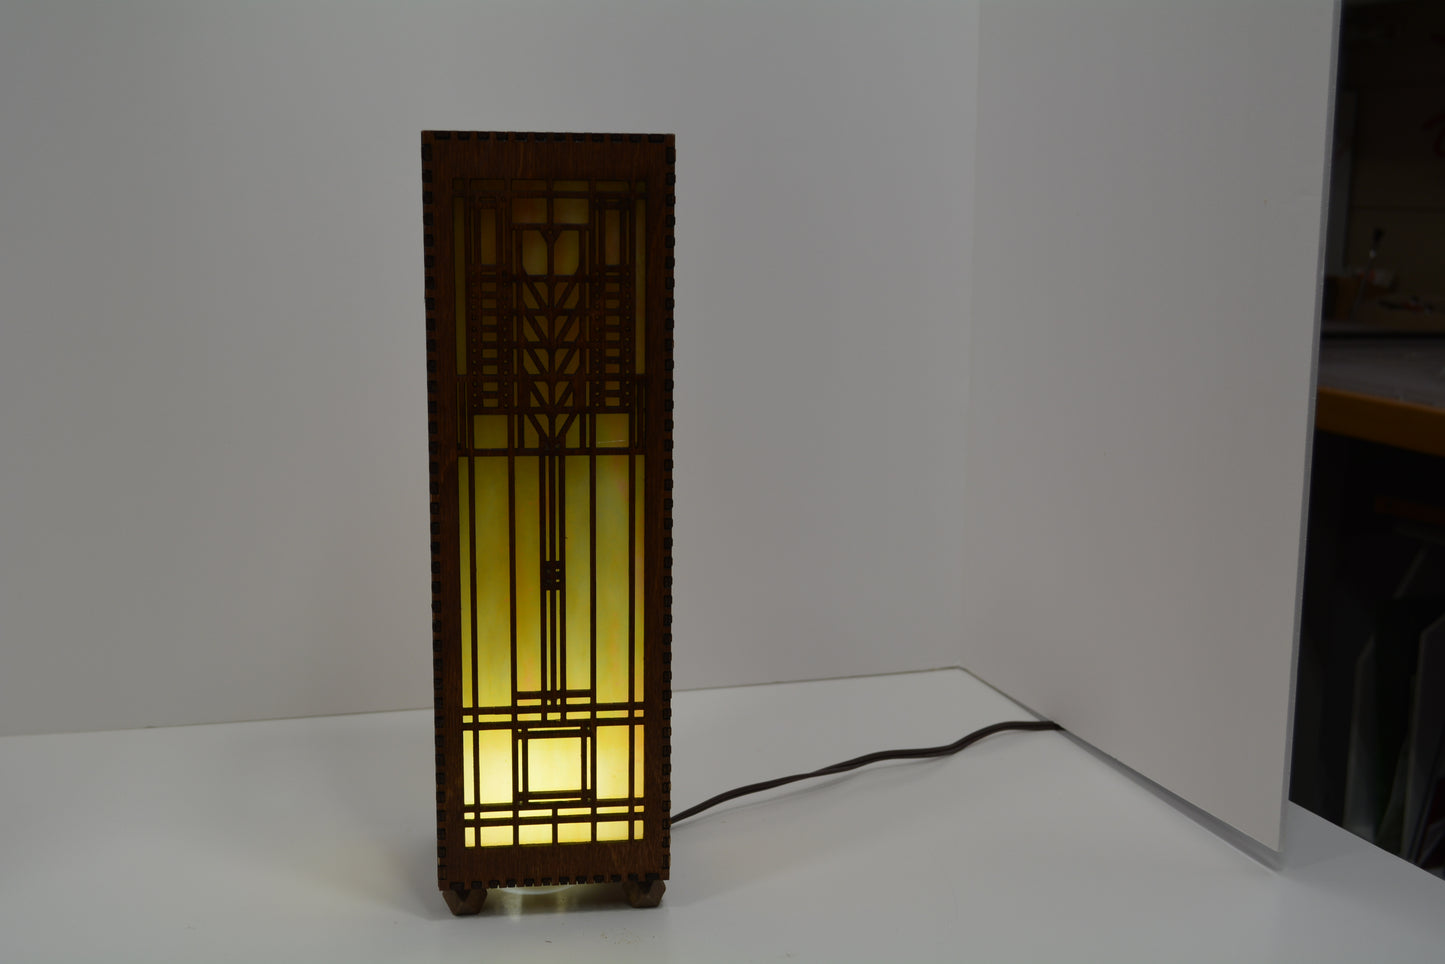 Golden Amber with Red Streaks Frank Llyod Wright design table lamp